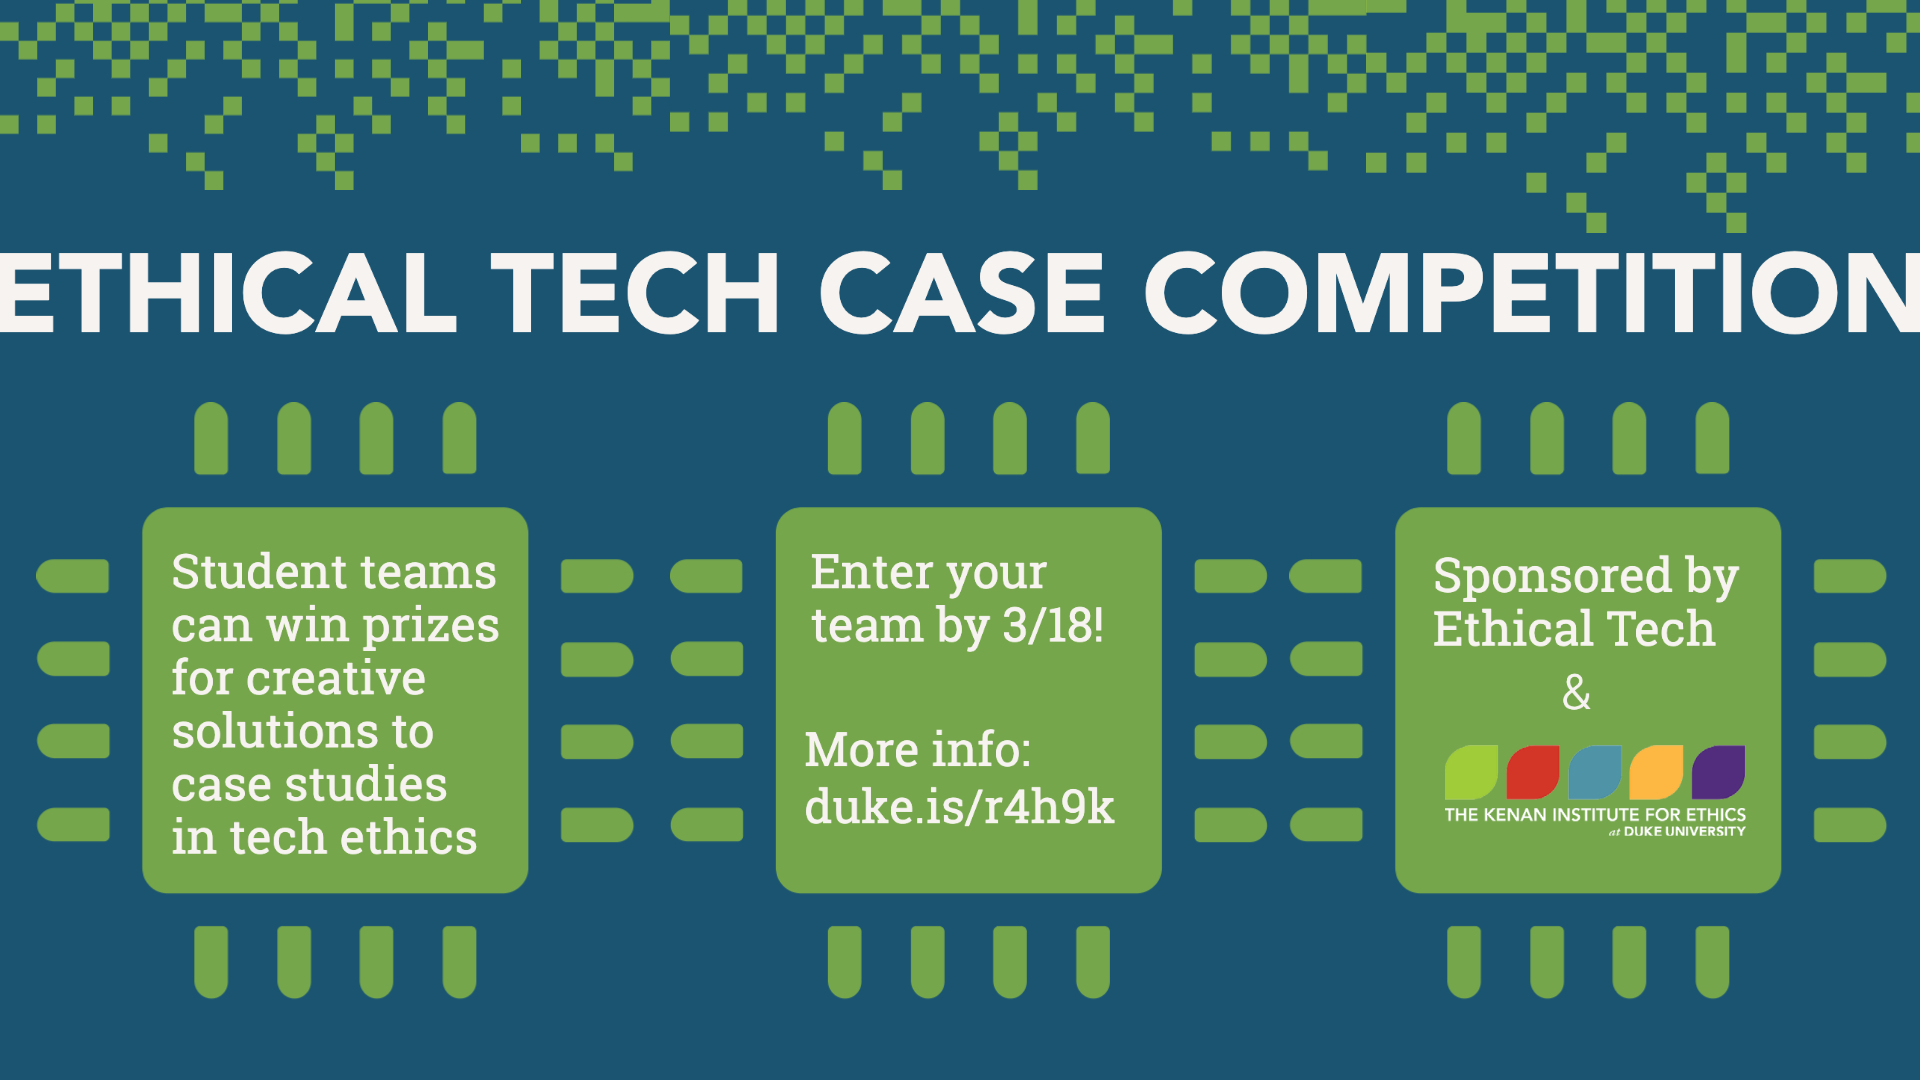 ETHICAL TECH CASE COMPETITION Student teams can win prizes for creative solutions to case studies in tech ethics Enter your team by 3/18! More info: duke.is/r4h9k Sponsored by Ethical Tech & the Kenan Institute for Ethics at Duke University